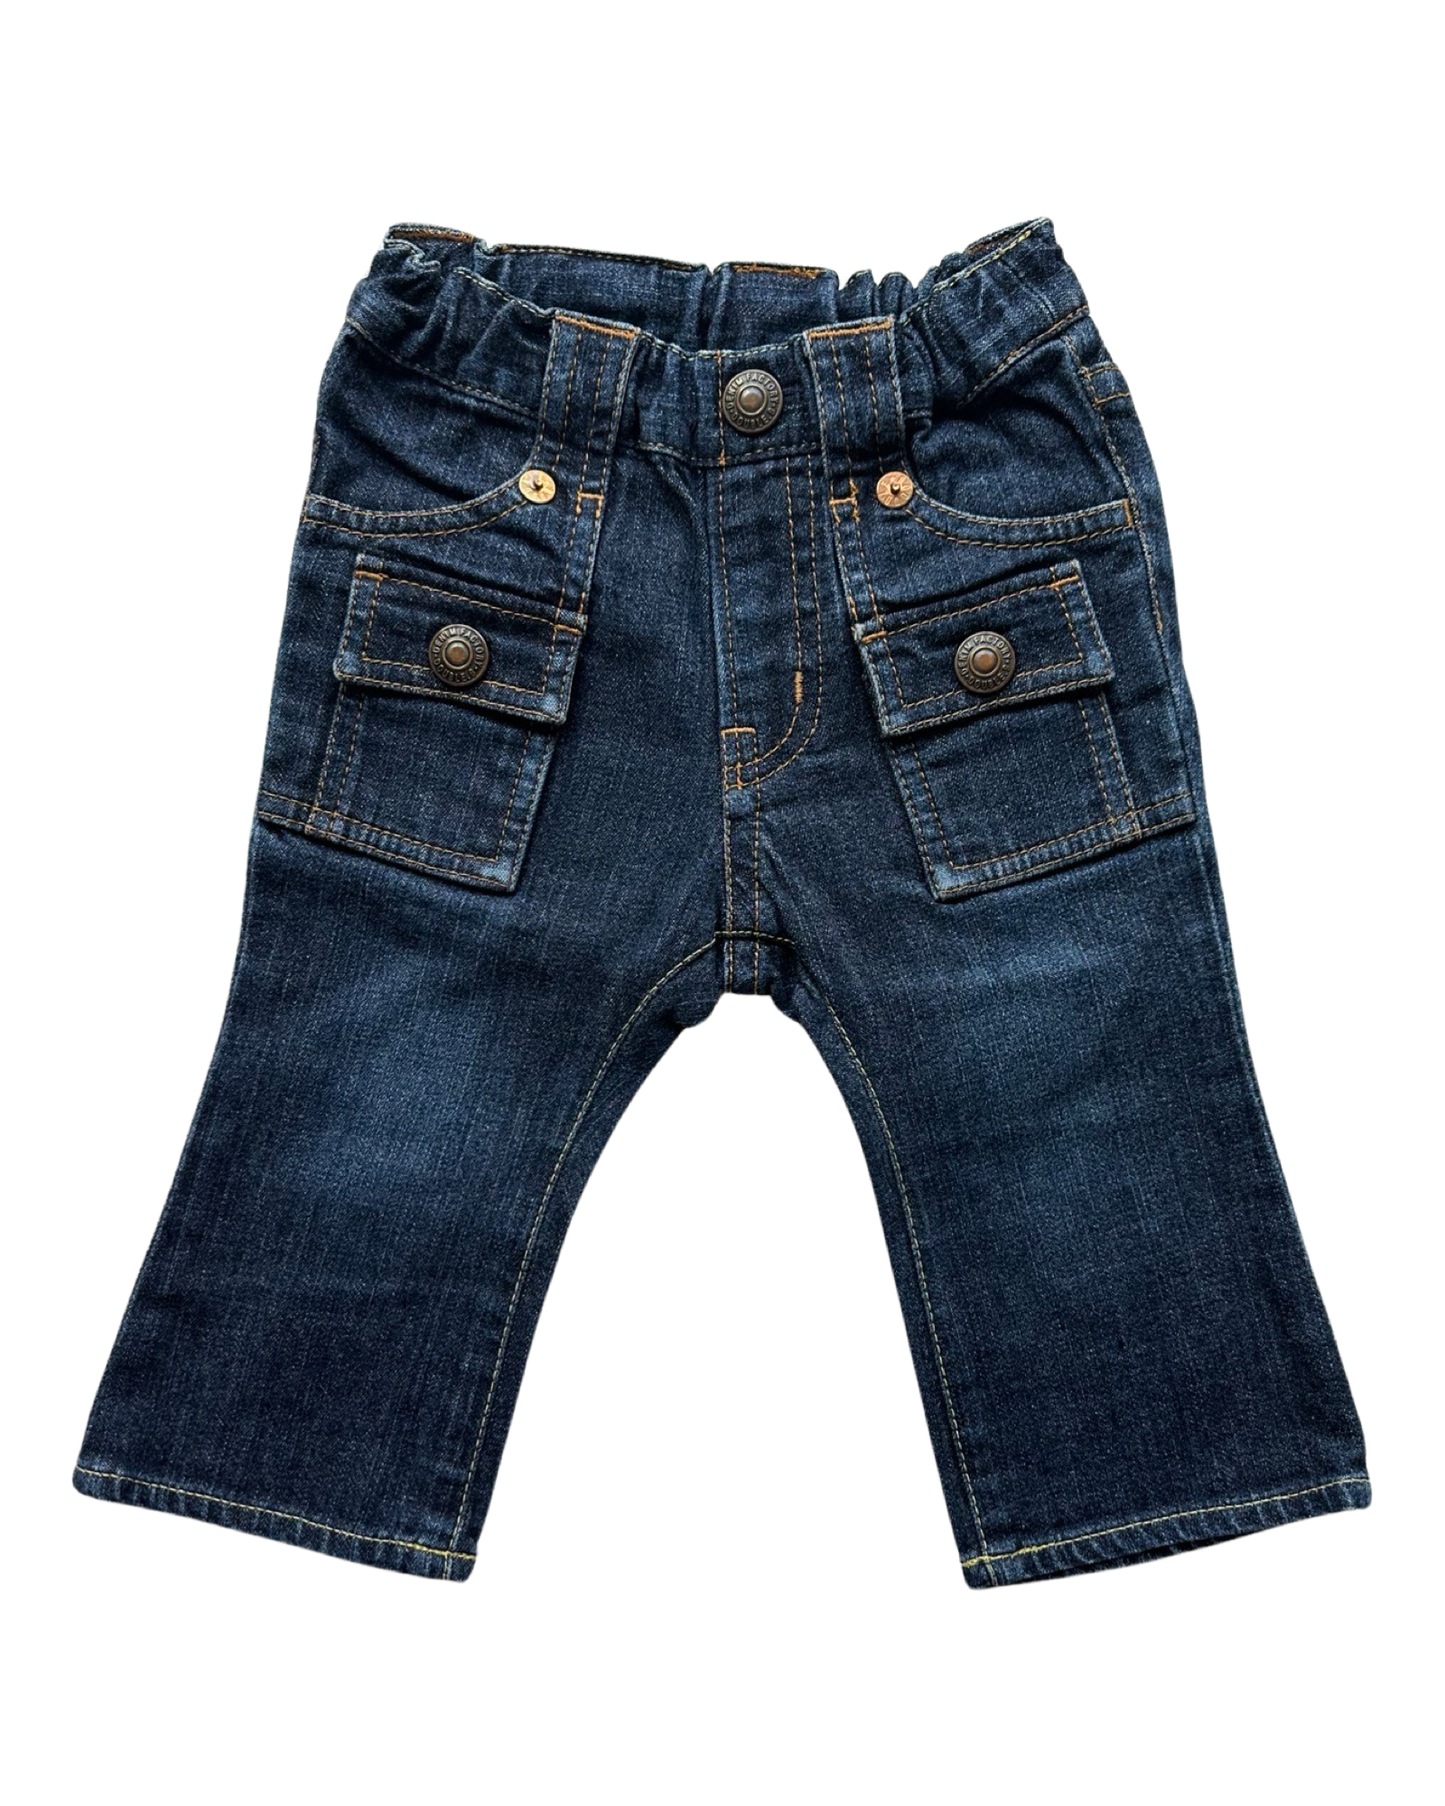 Mikihouse Double B denim toddler jeans (12-18mths)